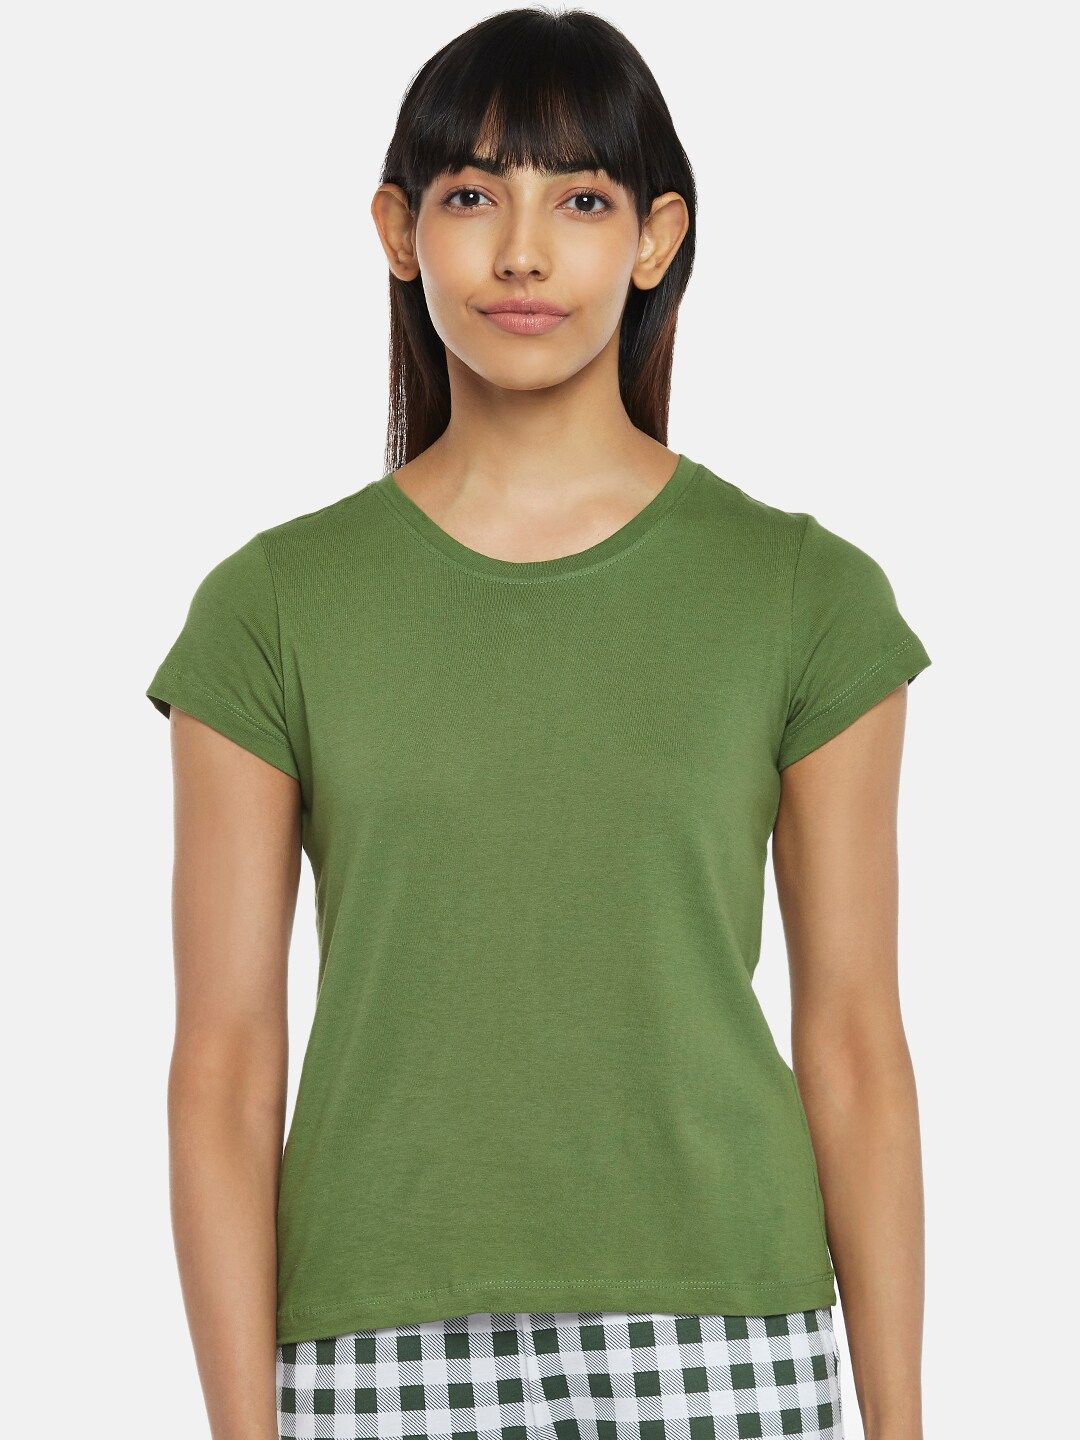 Dreamz by Pantaloons Women Olive Green Cotton Lounge T-Shirt Price in India